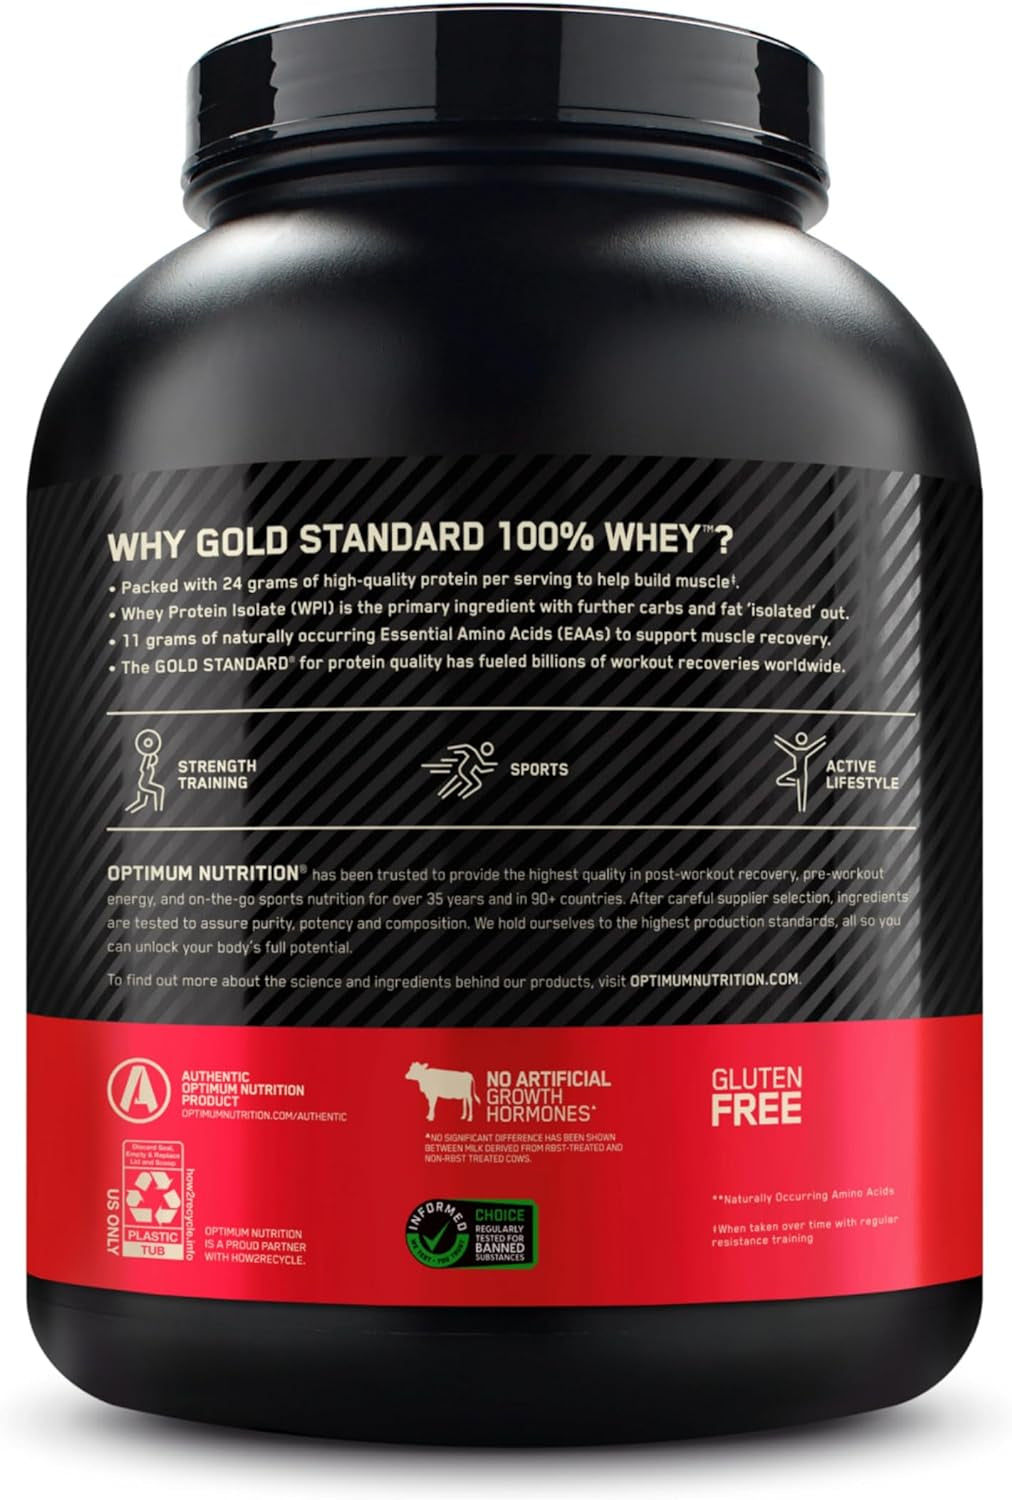 Gold Standard 100% Whey Muscle Building and Recovery Protein Powder with Naturally Occurring Glutamine and BCAA Amino Acids, French Vanilla Crème Flavour, 76 Servings, 2.28 Kg